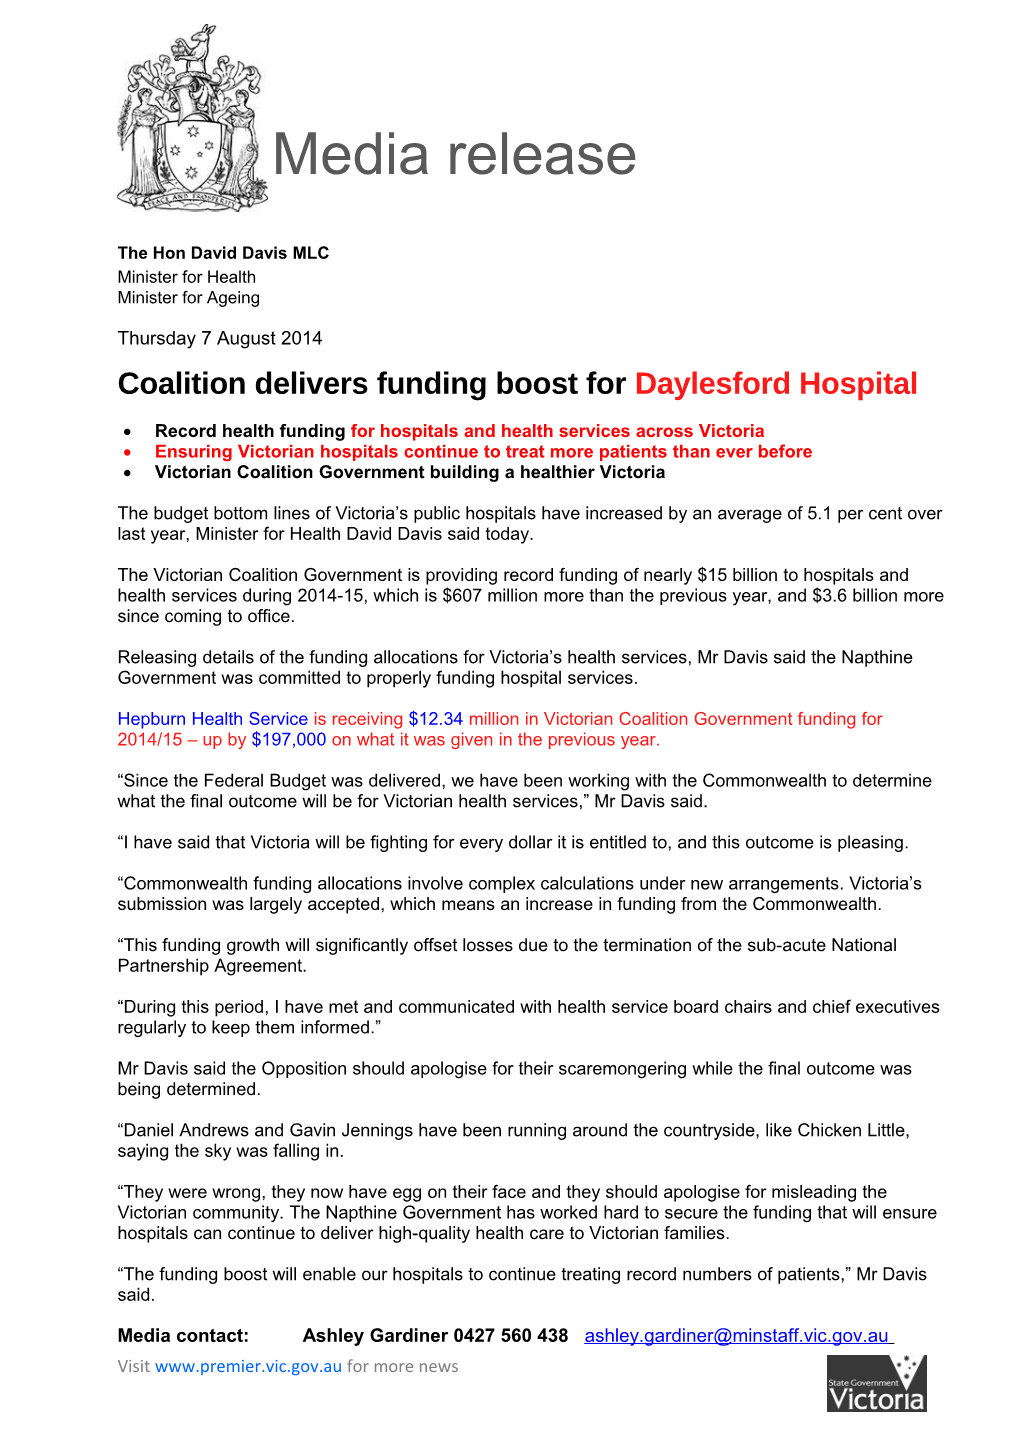 Coalition Delivers Funding Boost for Daylesford Hospital